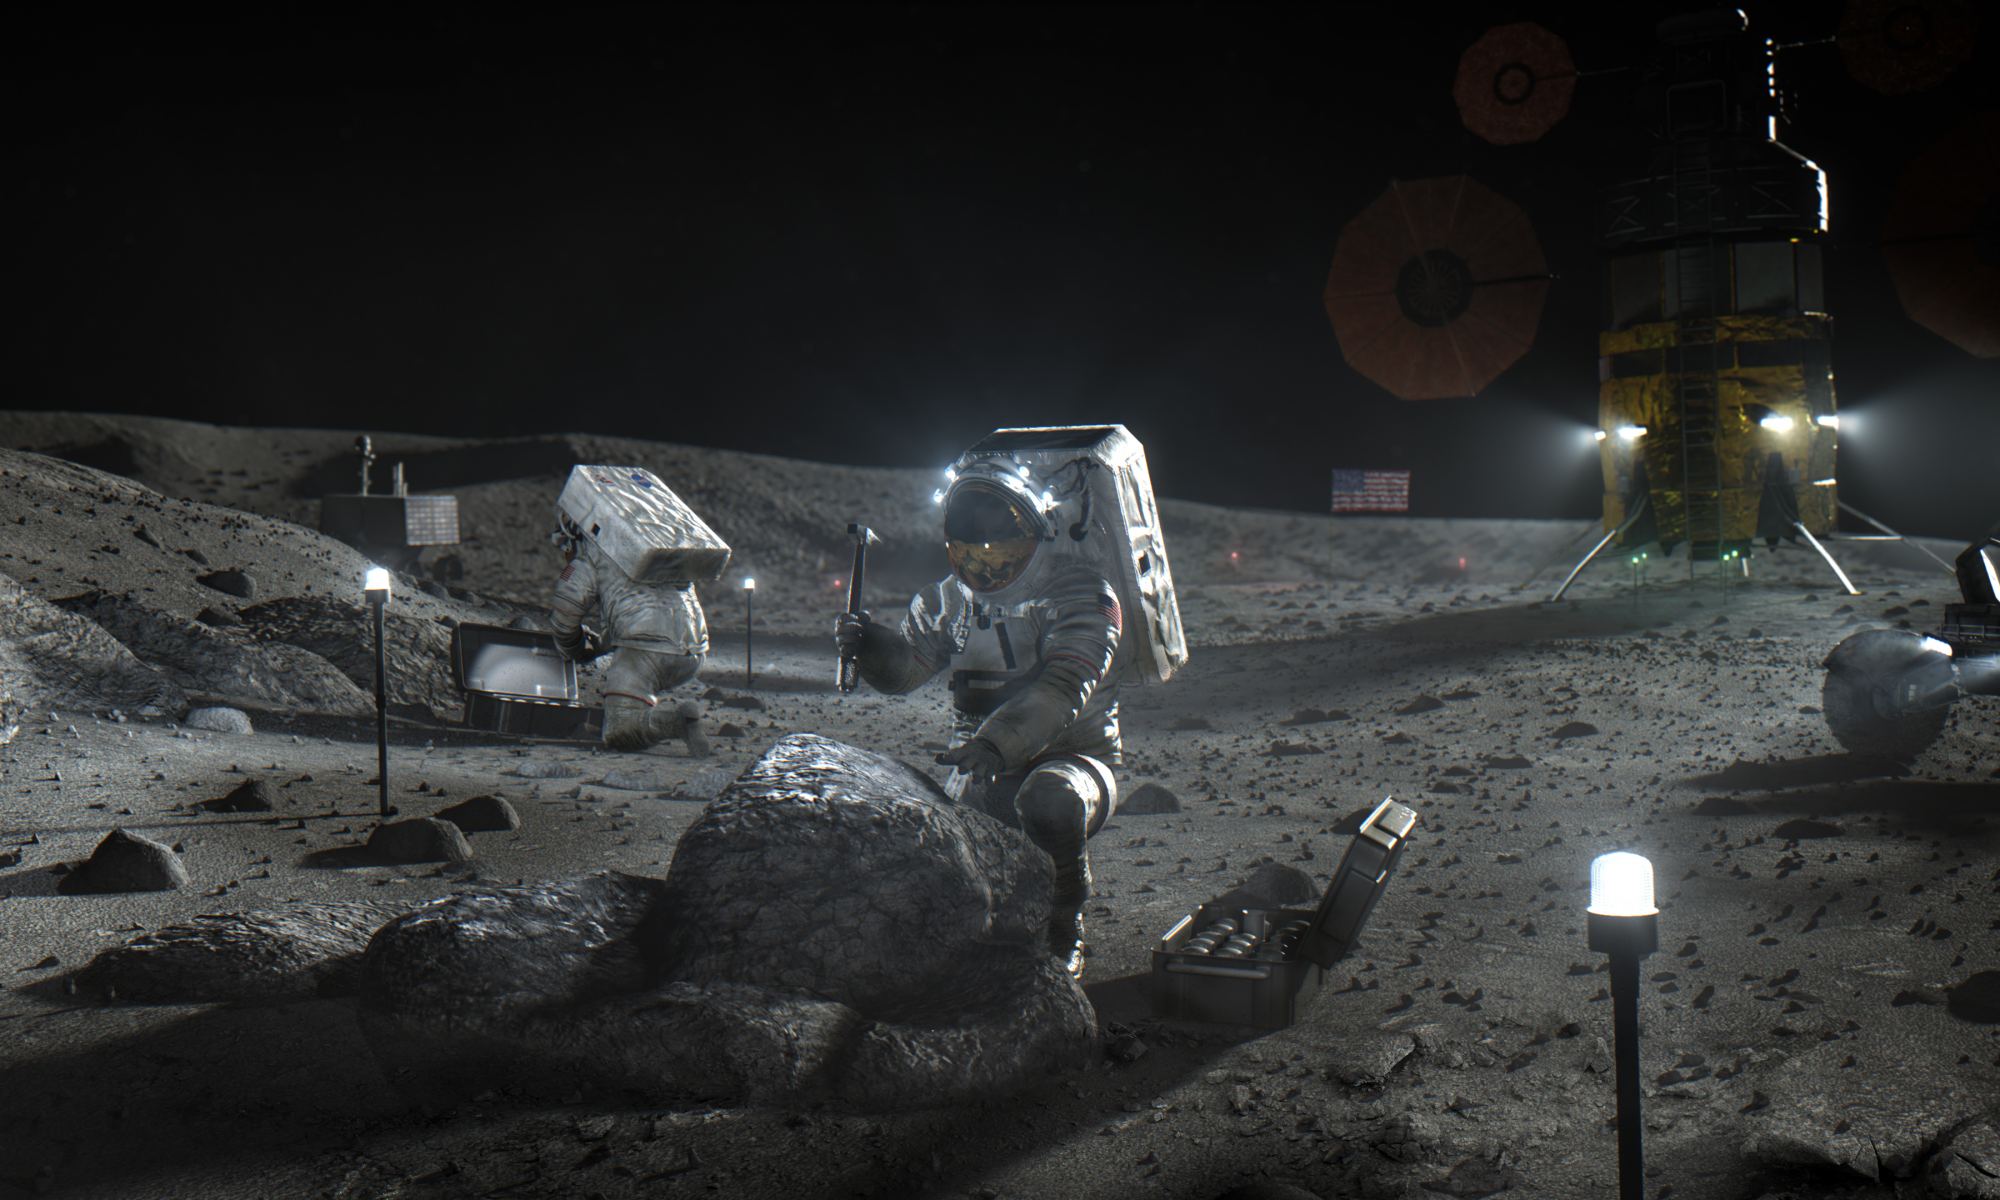 Artist's impression of astronauts on the lunar surface, as part of the Artemis Program. Lunar explorers will need communicationa nd navigation aids while on the surface. NASa is developing a lunar mapping-based program to help them. Credit: NASA